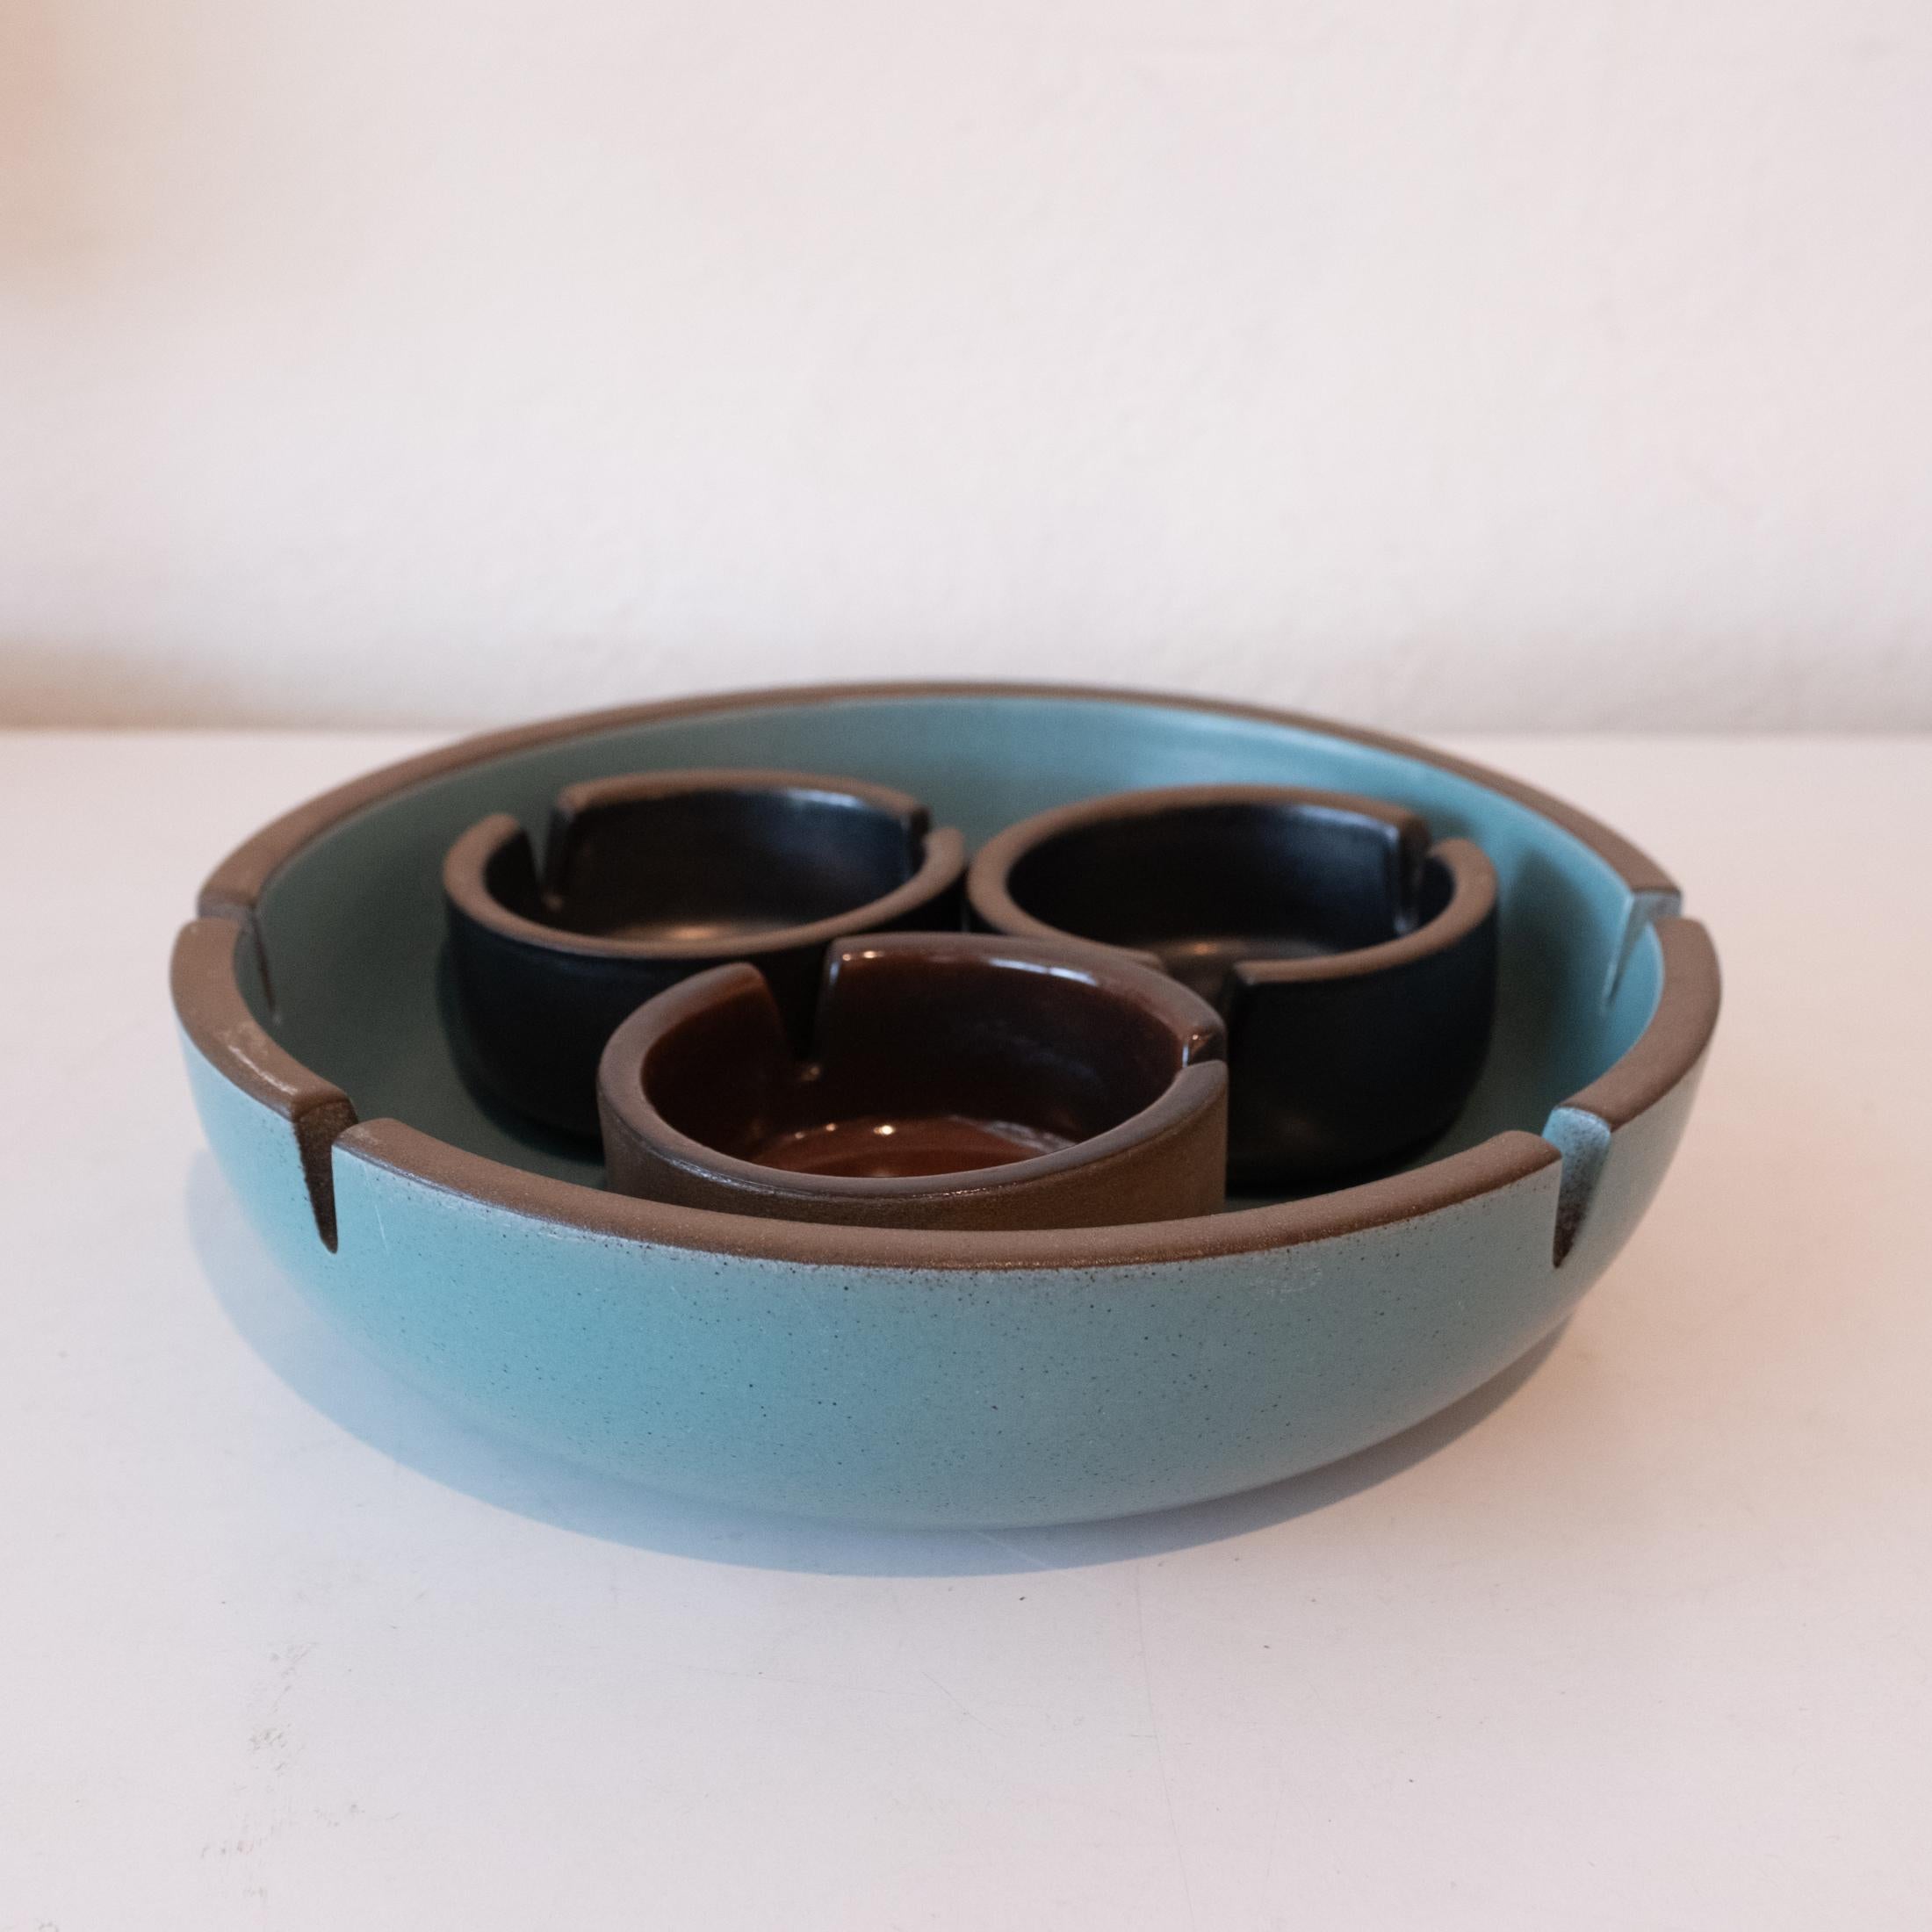 A set of four ashtrays designed by Edith Heath for her company, Heath Ceramics. A classic design by the vanguard ceramicist. Made in California in the 1950s. 

Large: 8.5